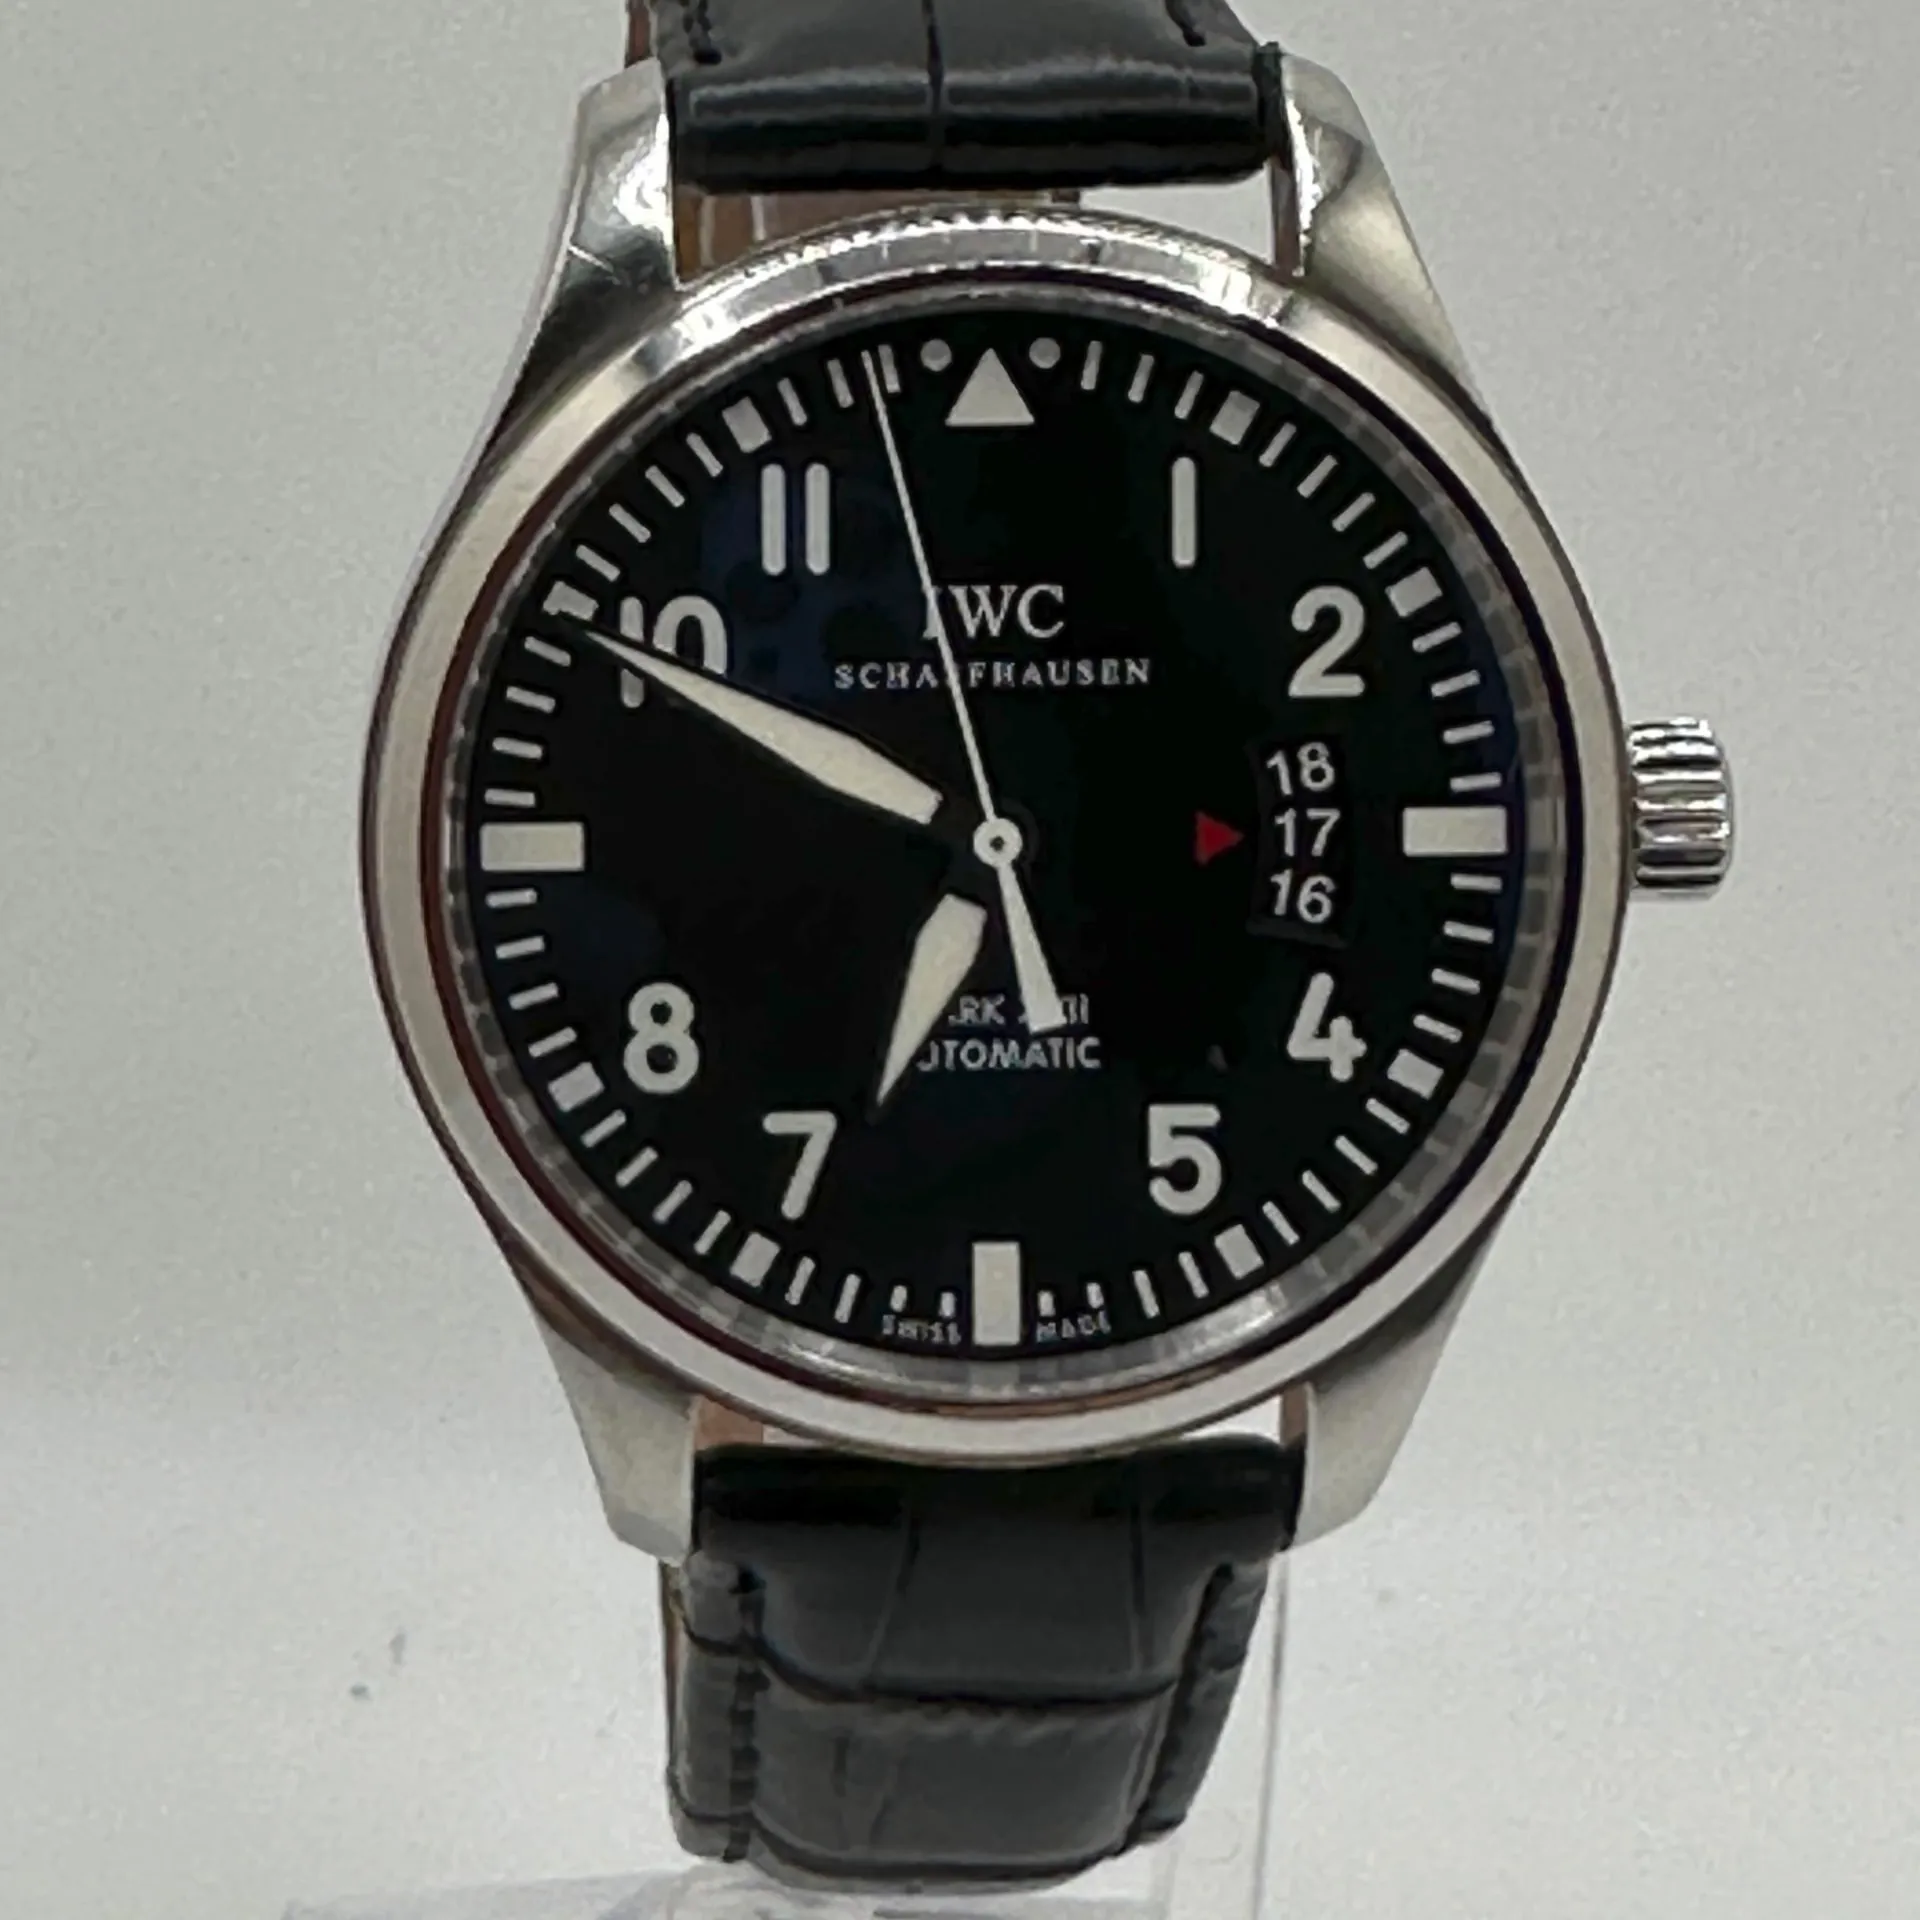 IWC Pilot Mark IW326501 41mm Stainless steel Black